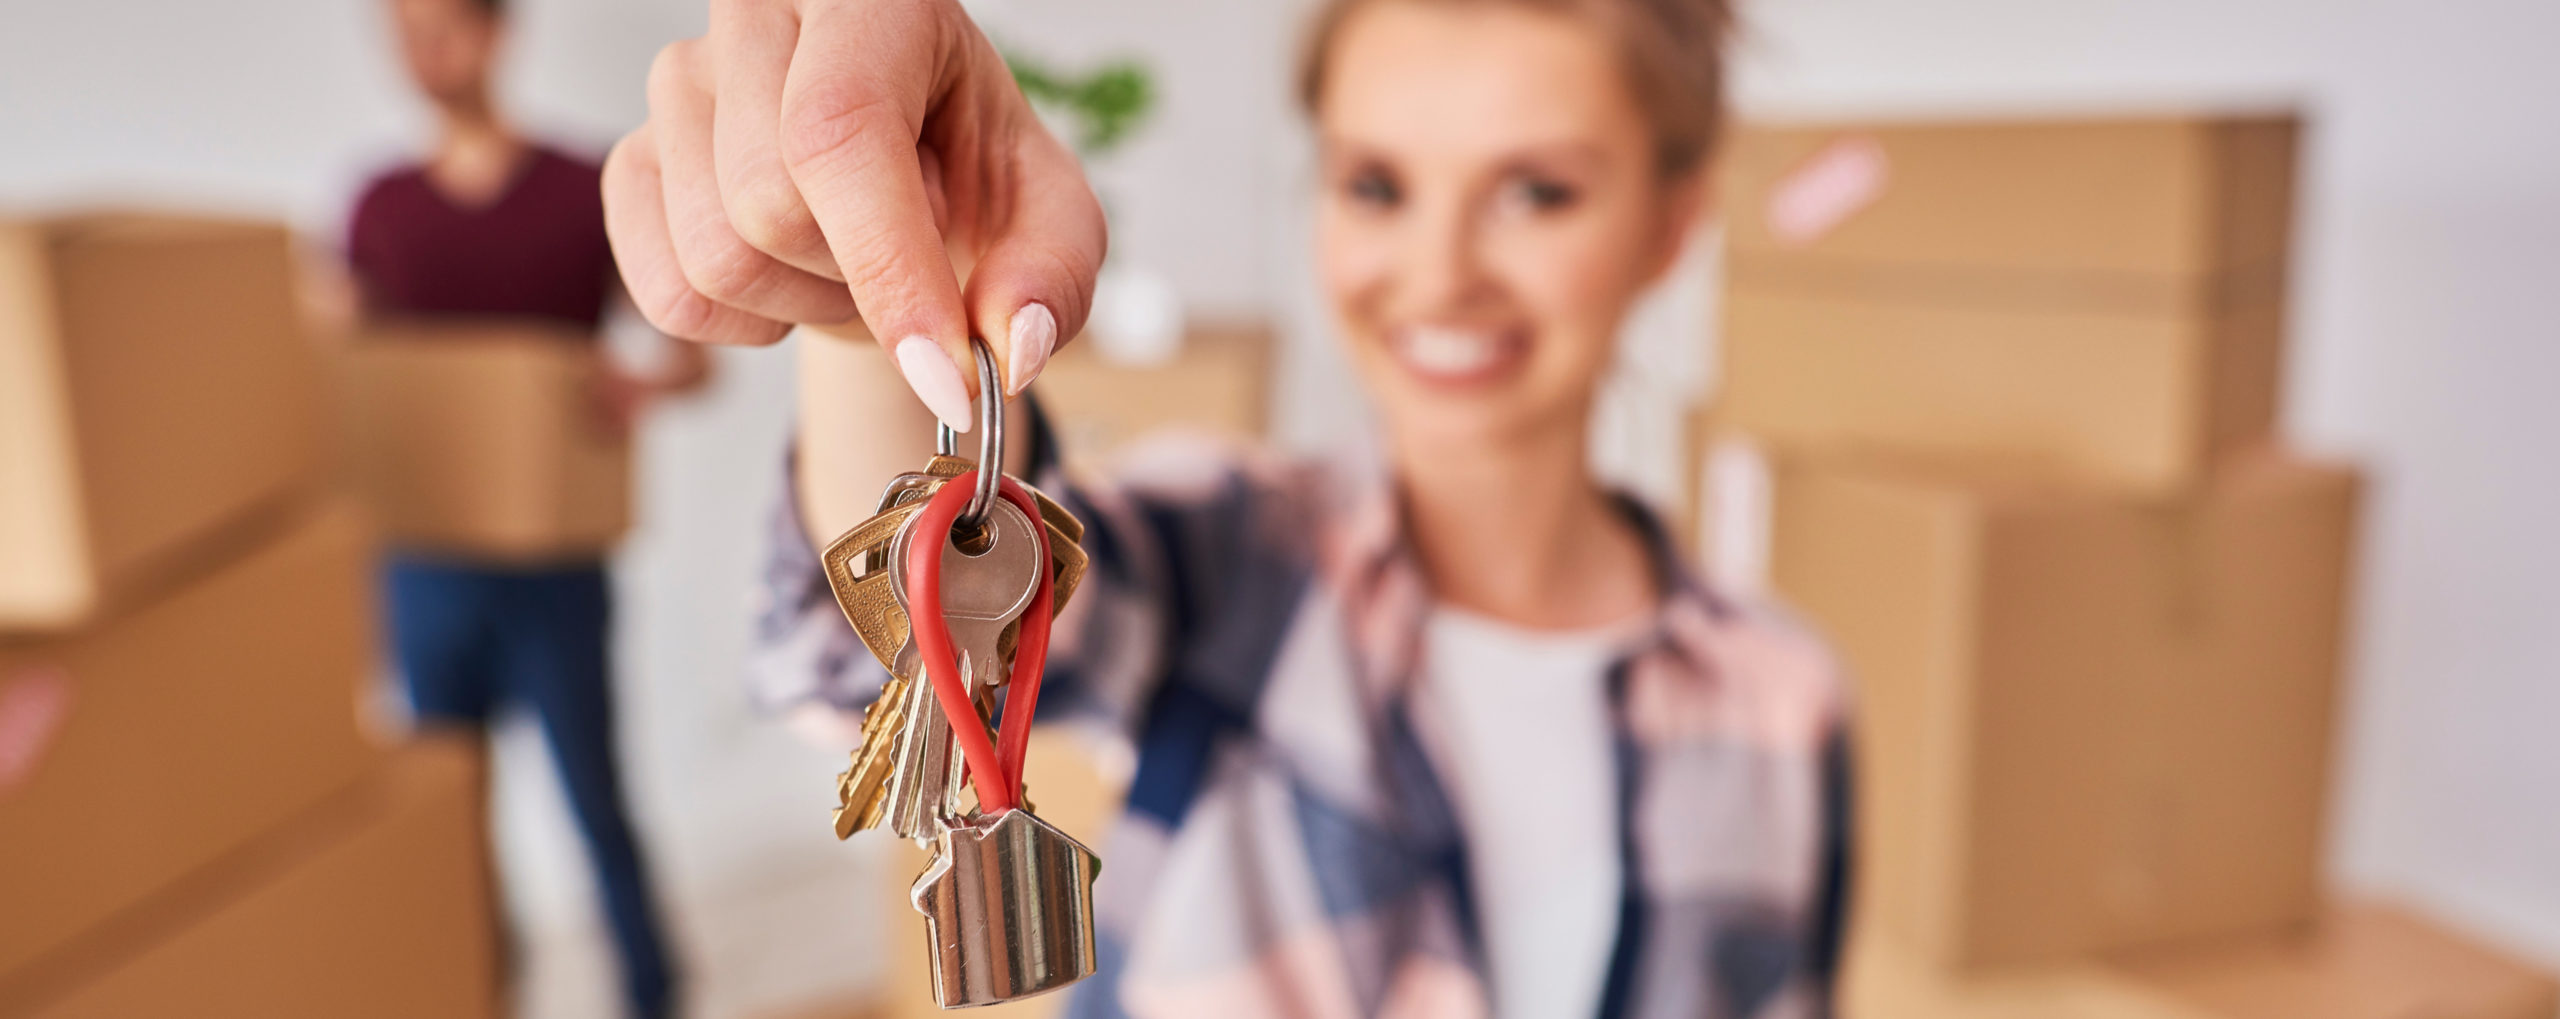 Are You Thinking Of Buying A Home? Here’s How To Prepare.